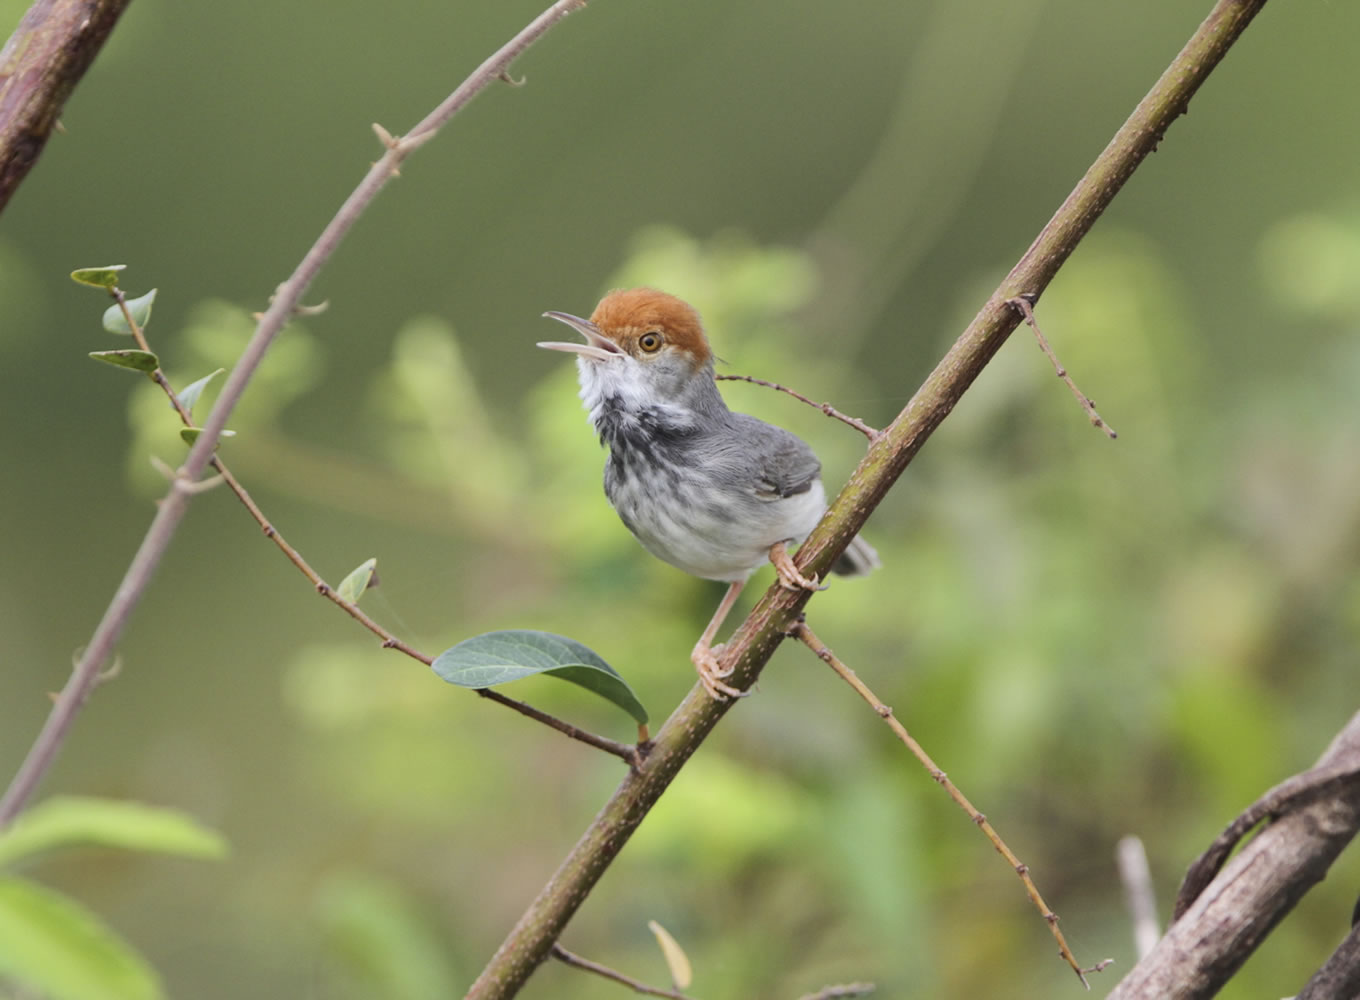 The Cambodian tailorbird -- a small, dark warbler with an orange-red tuft on its head discovered, in Phnom Penh.